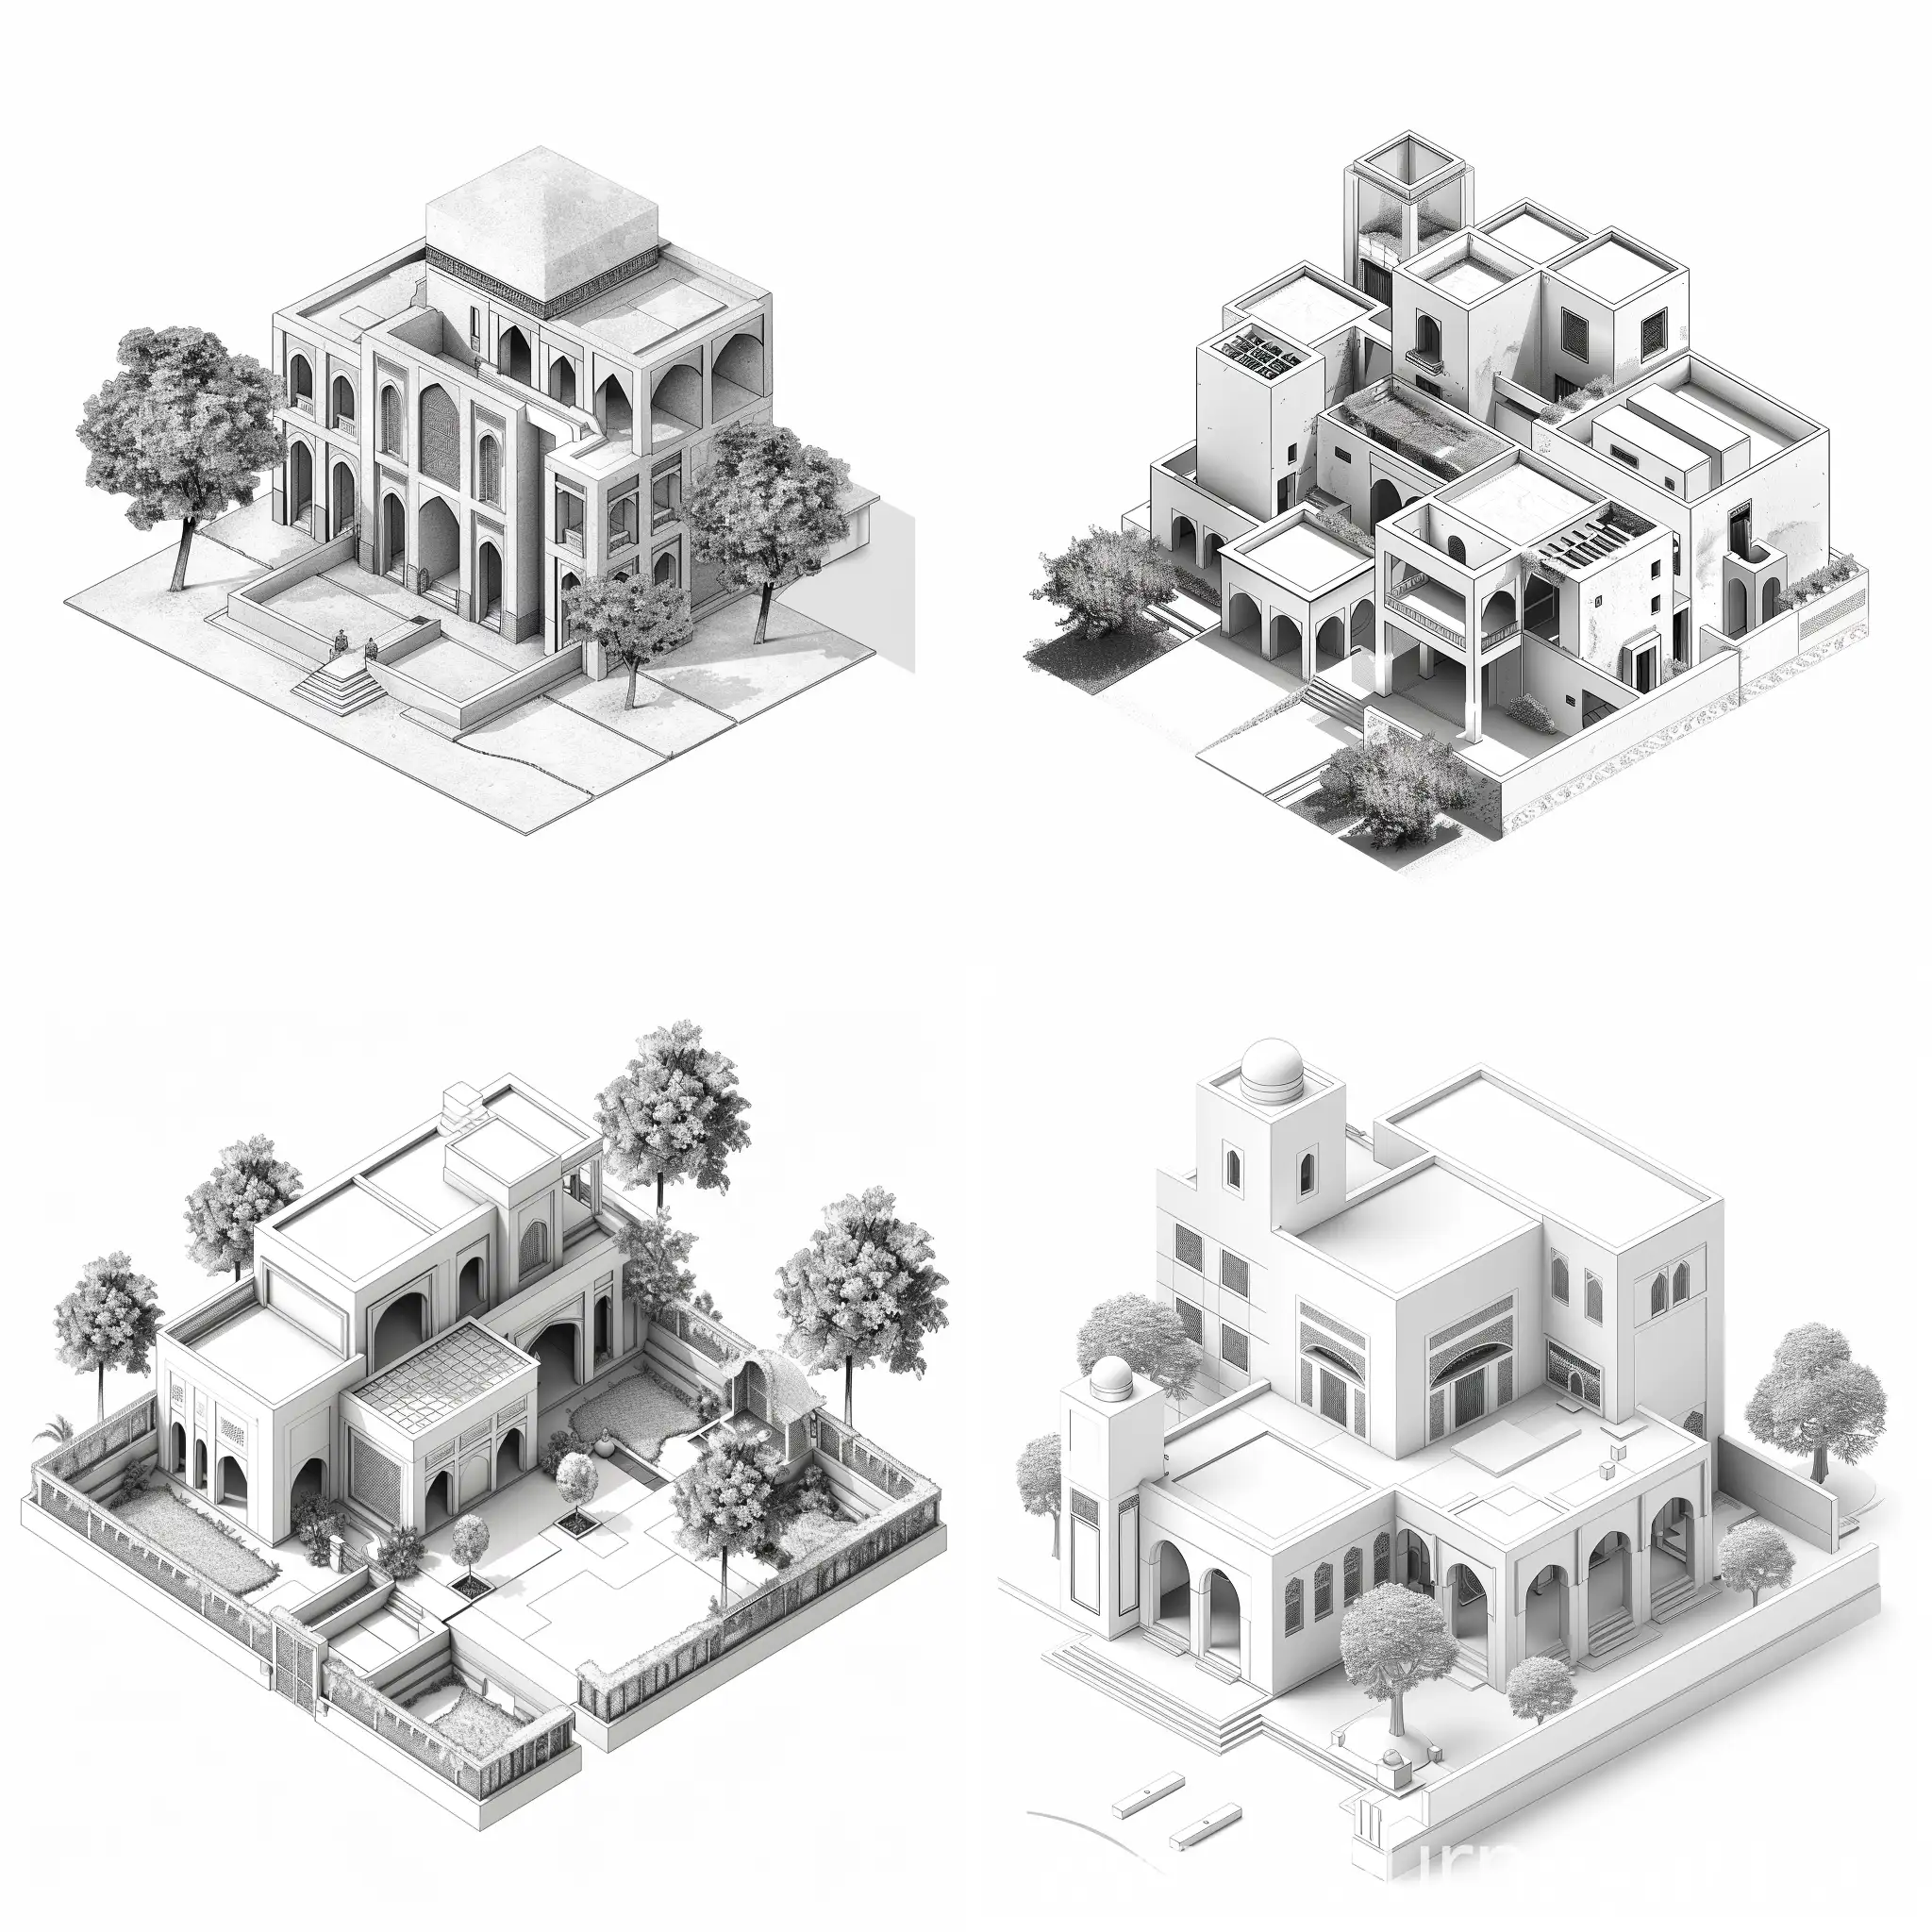 Historical-Persian-Architecture-Meets-Modern-Residential-Design-in-Isometric-2D-Illustration